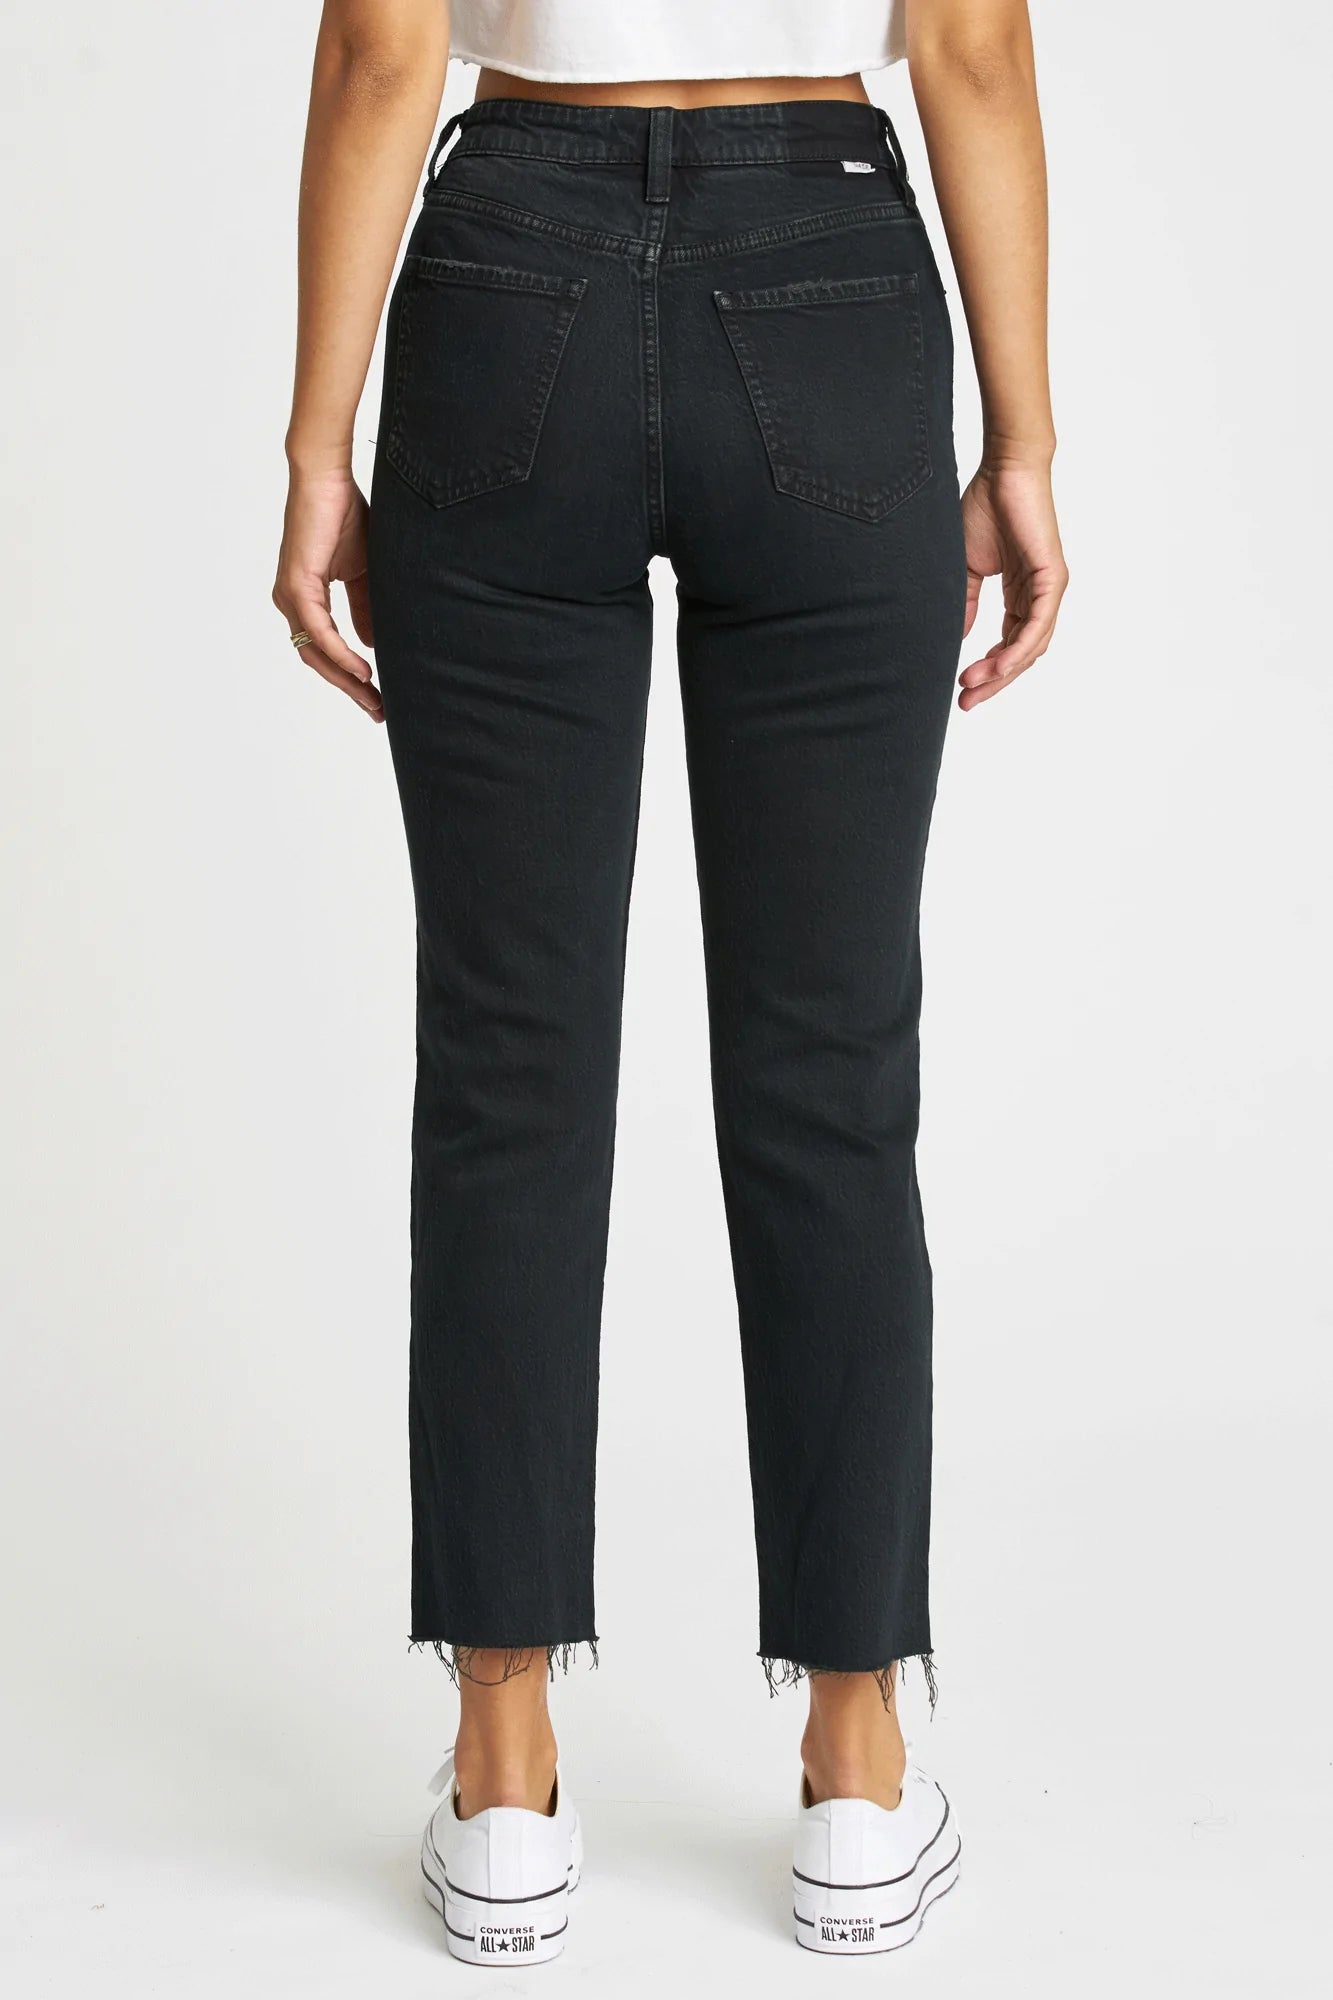 Daily Driver High Rise Skinny